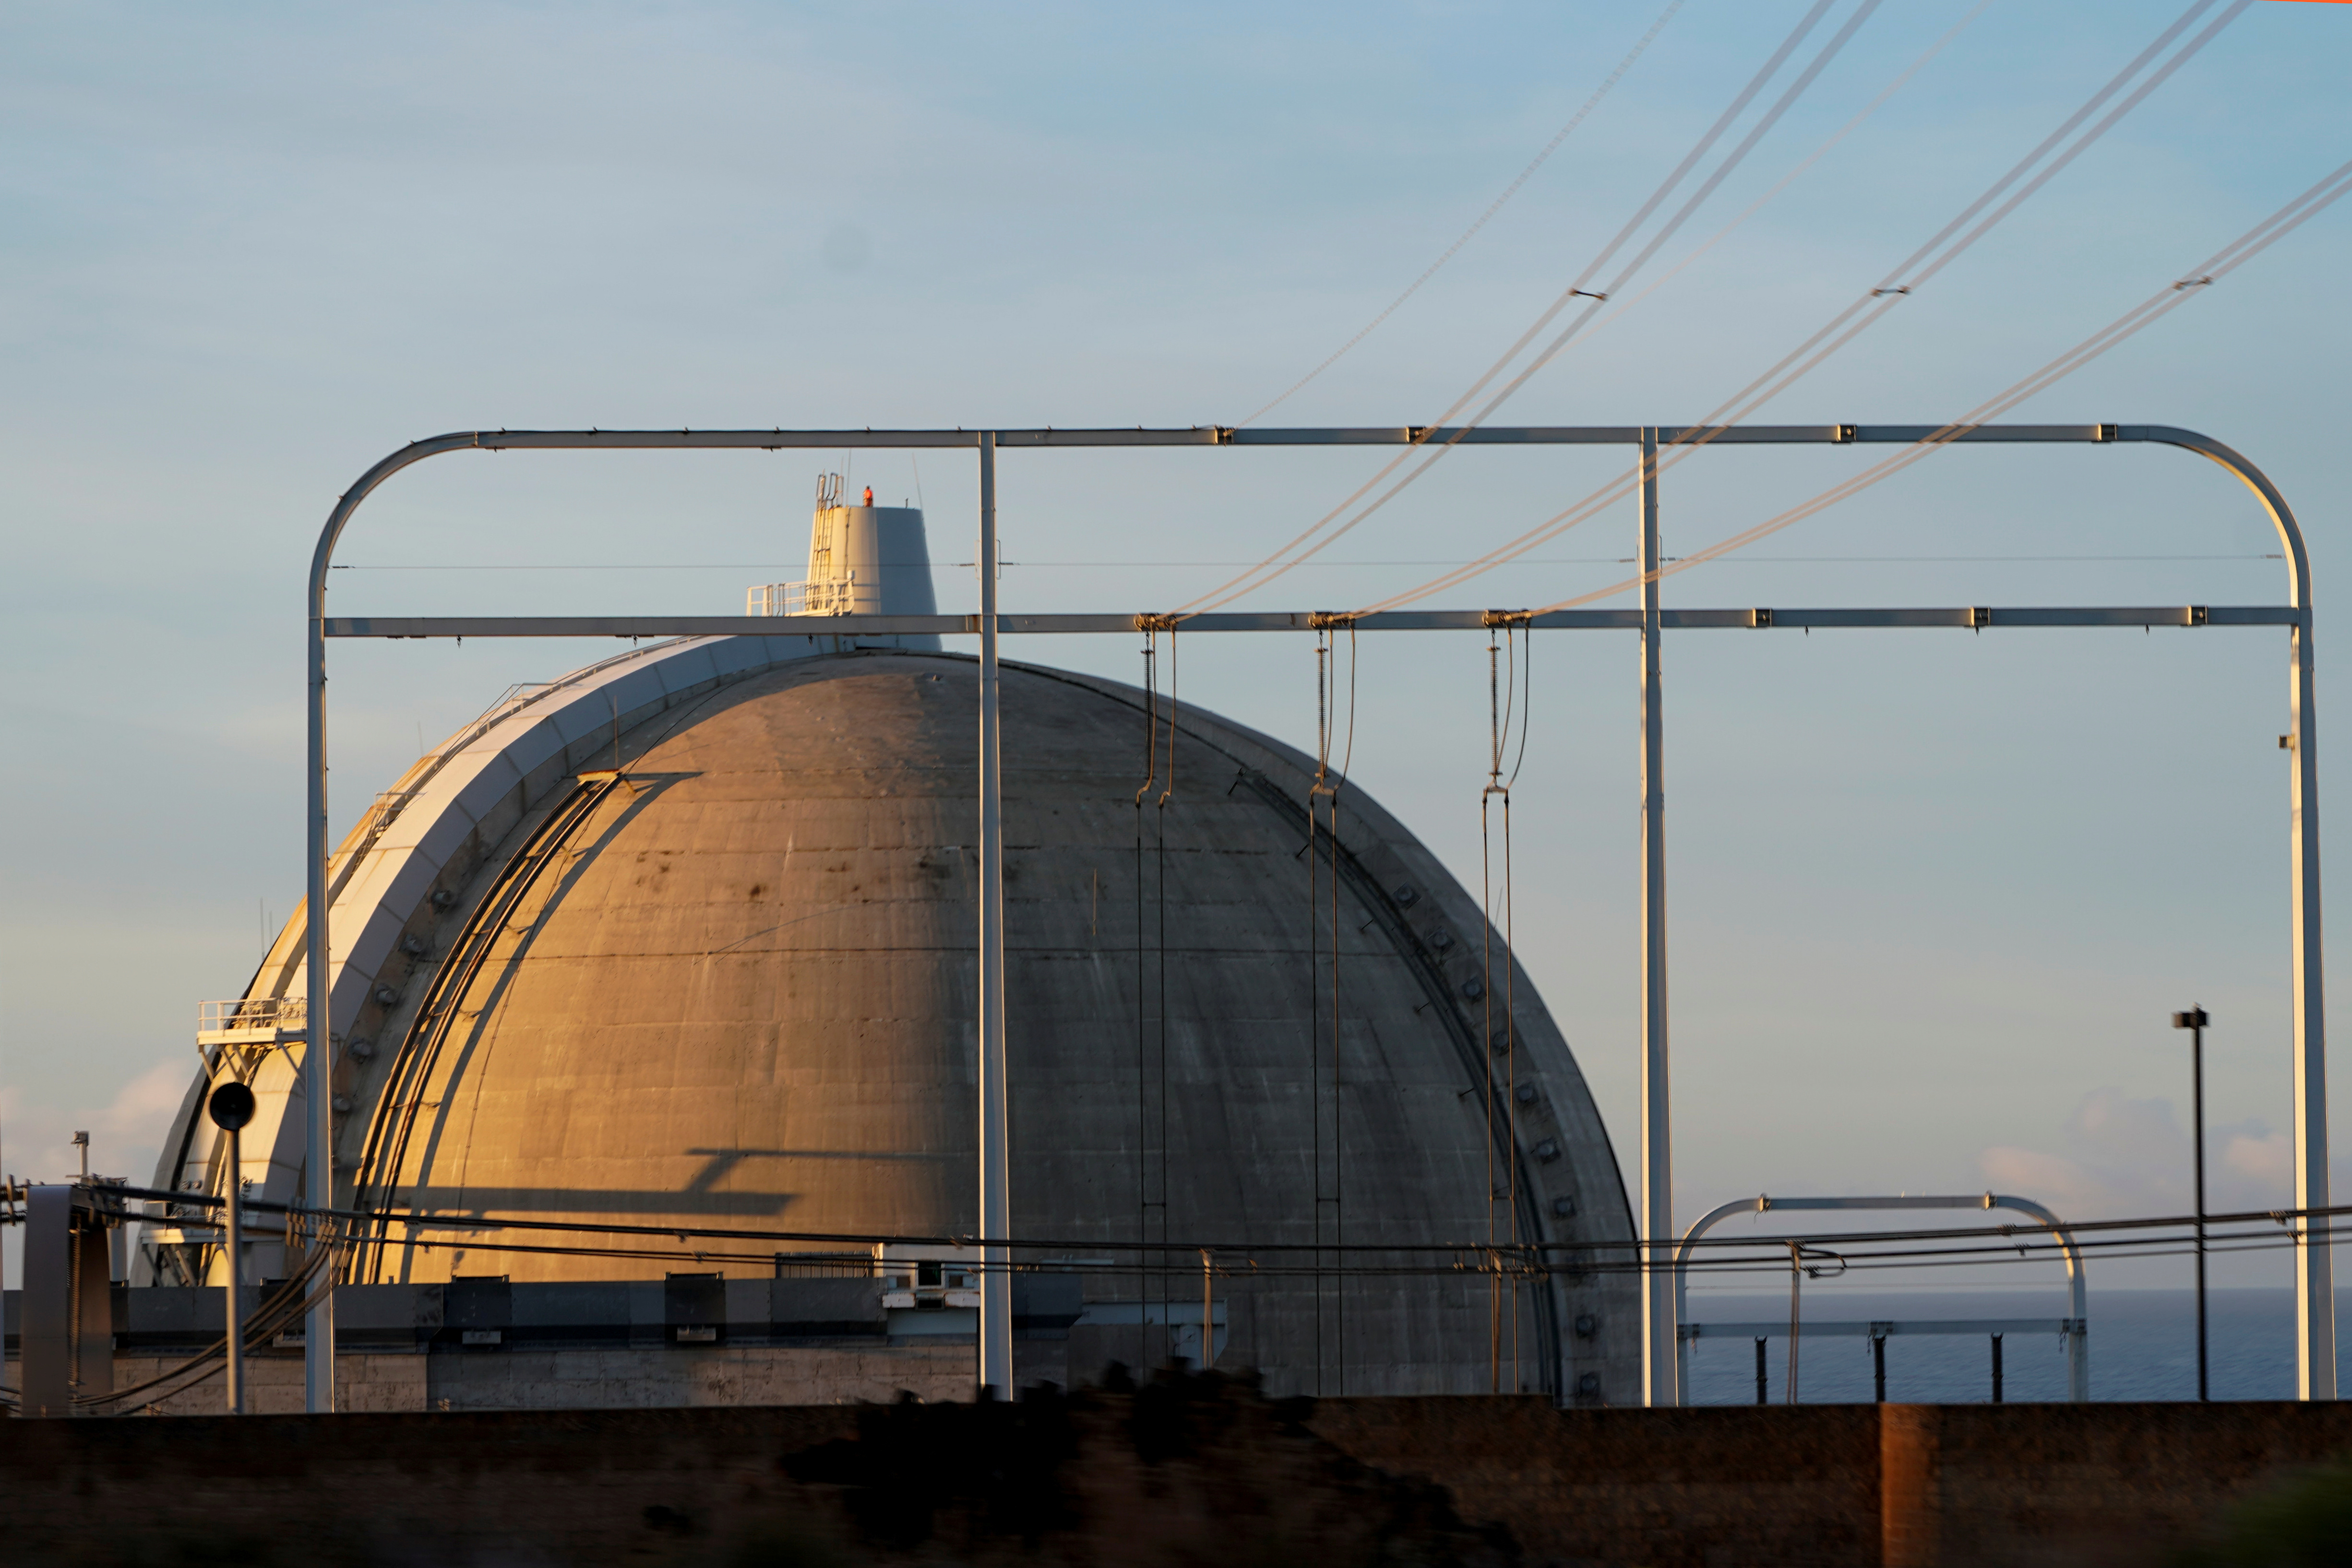 One of the two now closed reactors of the San Onofre nuclear generating station is shown at the nuclear power plant located south of San Clemente